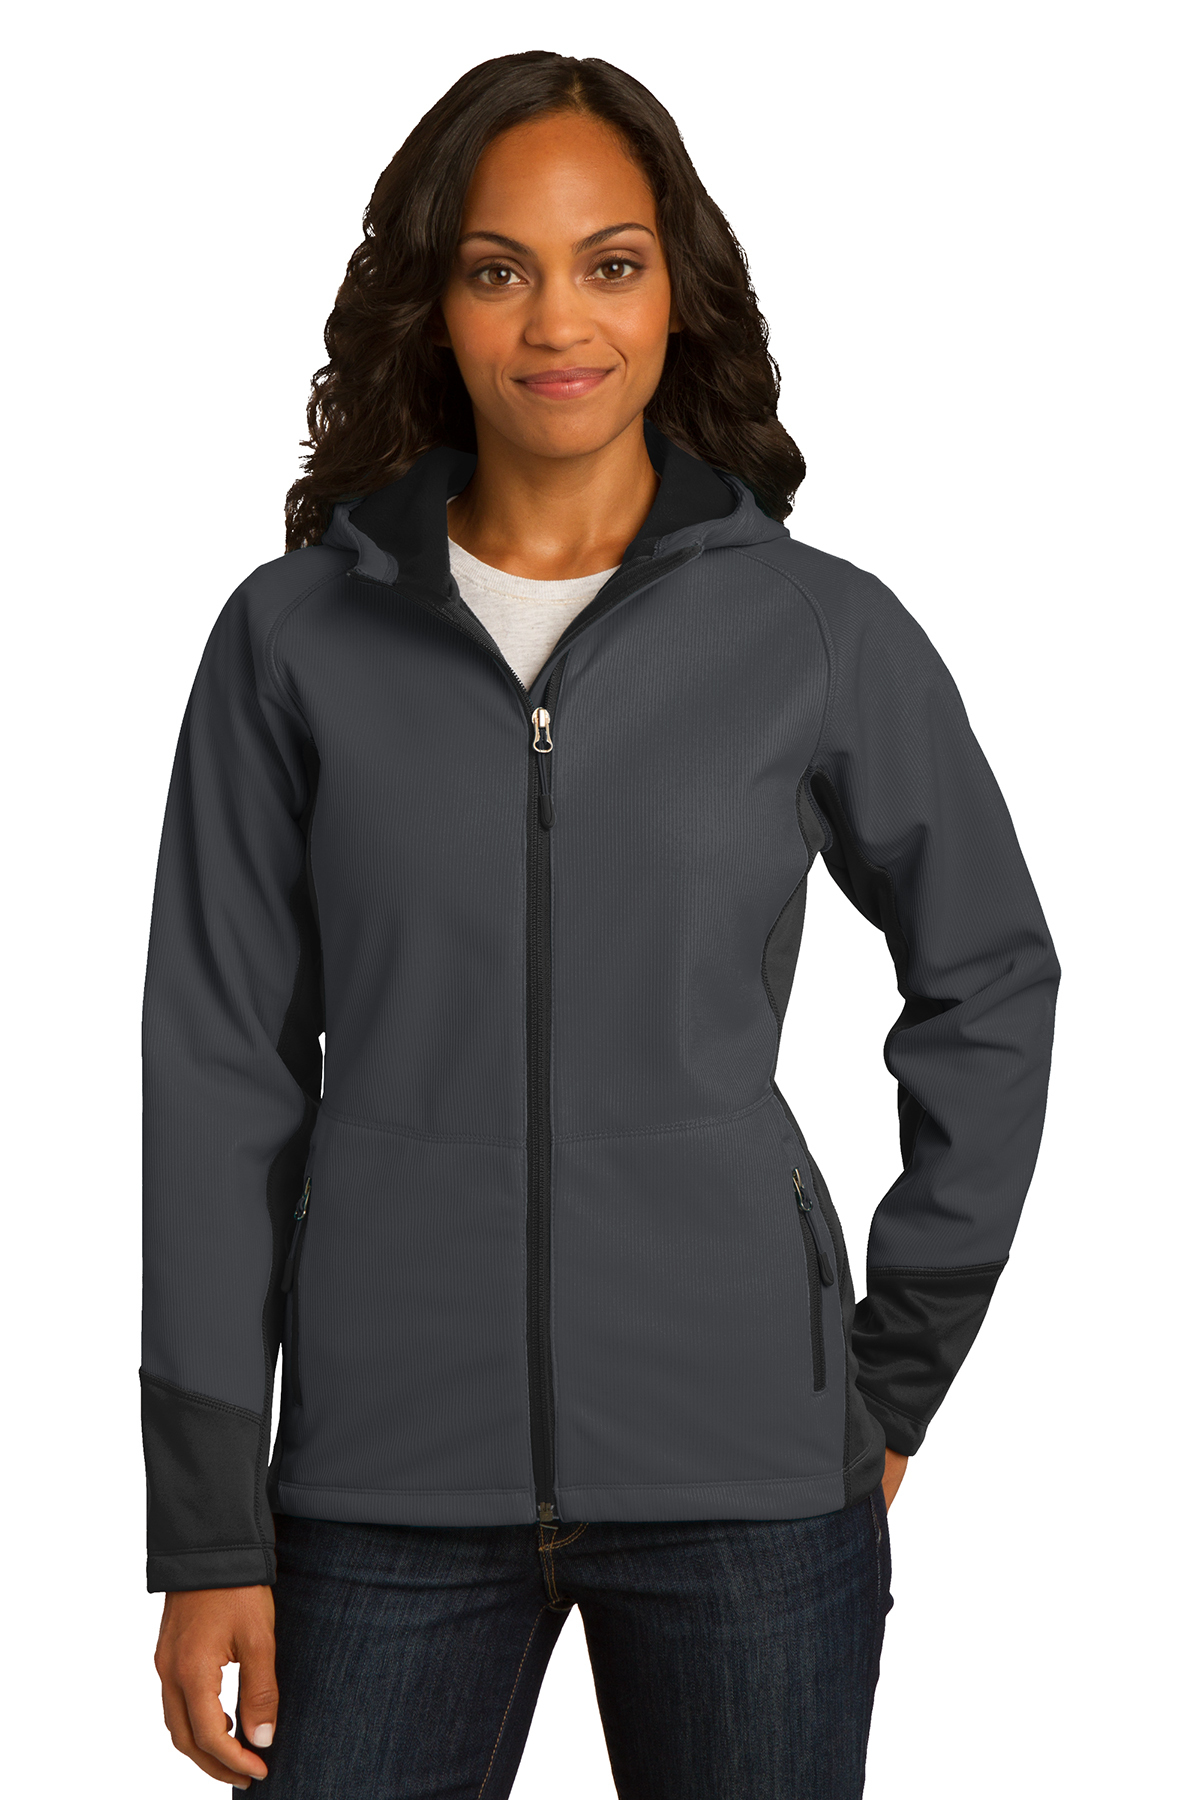 Port Authority Ladies Vertical Hooded Soft Shell Jacket | Product | SanMar